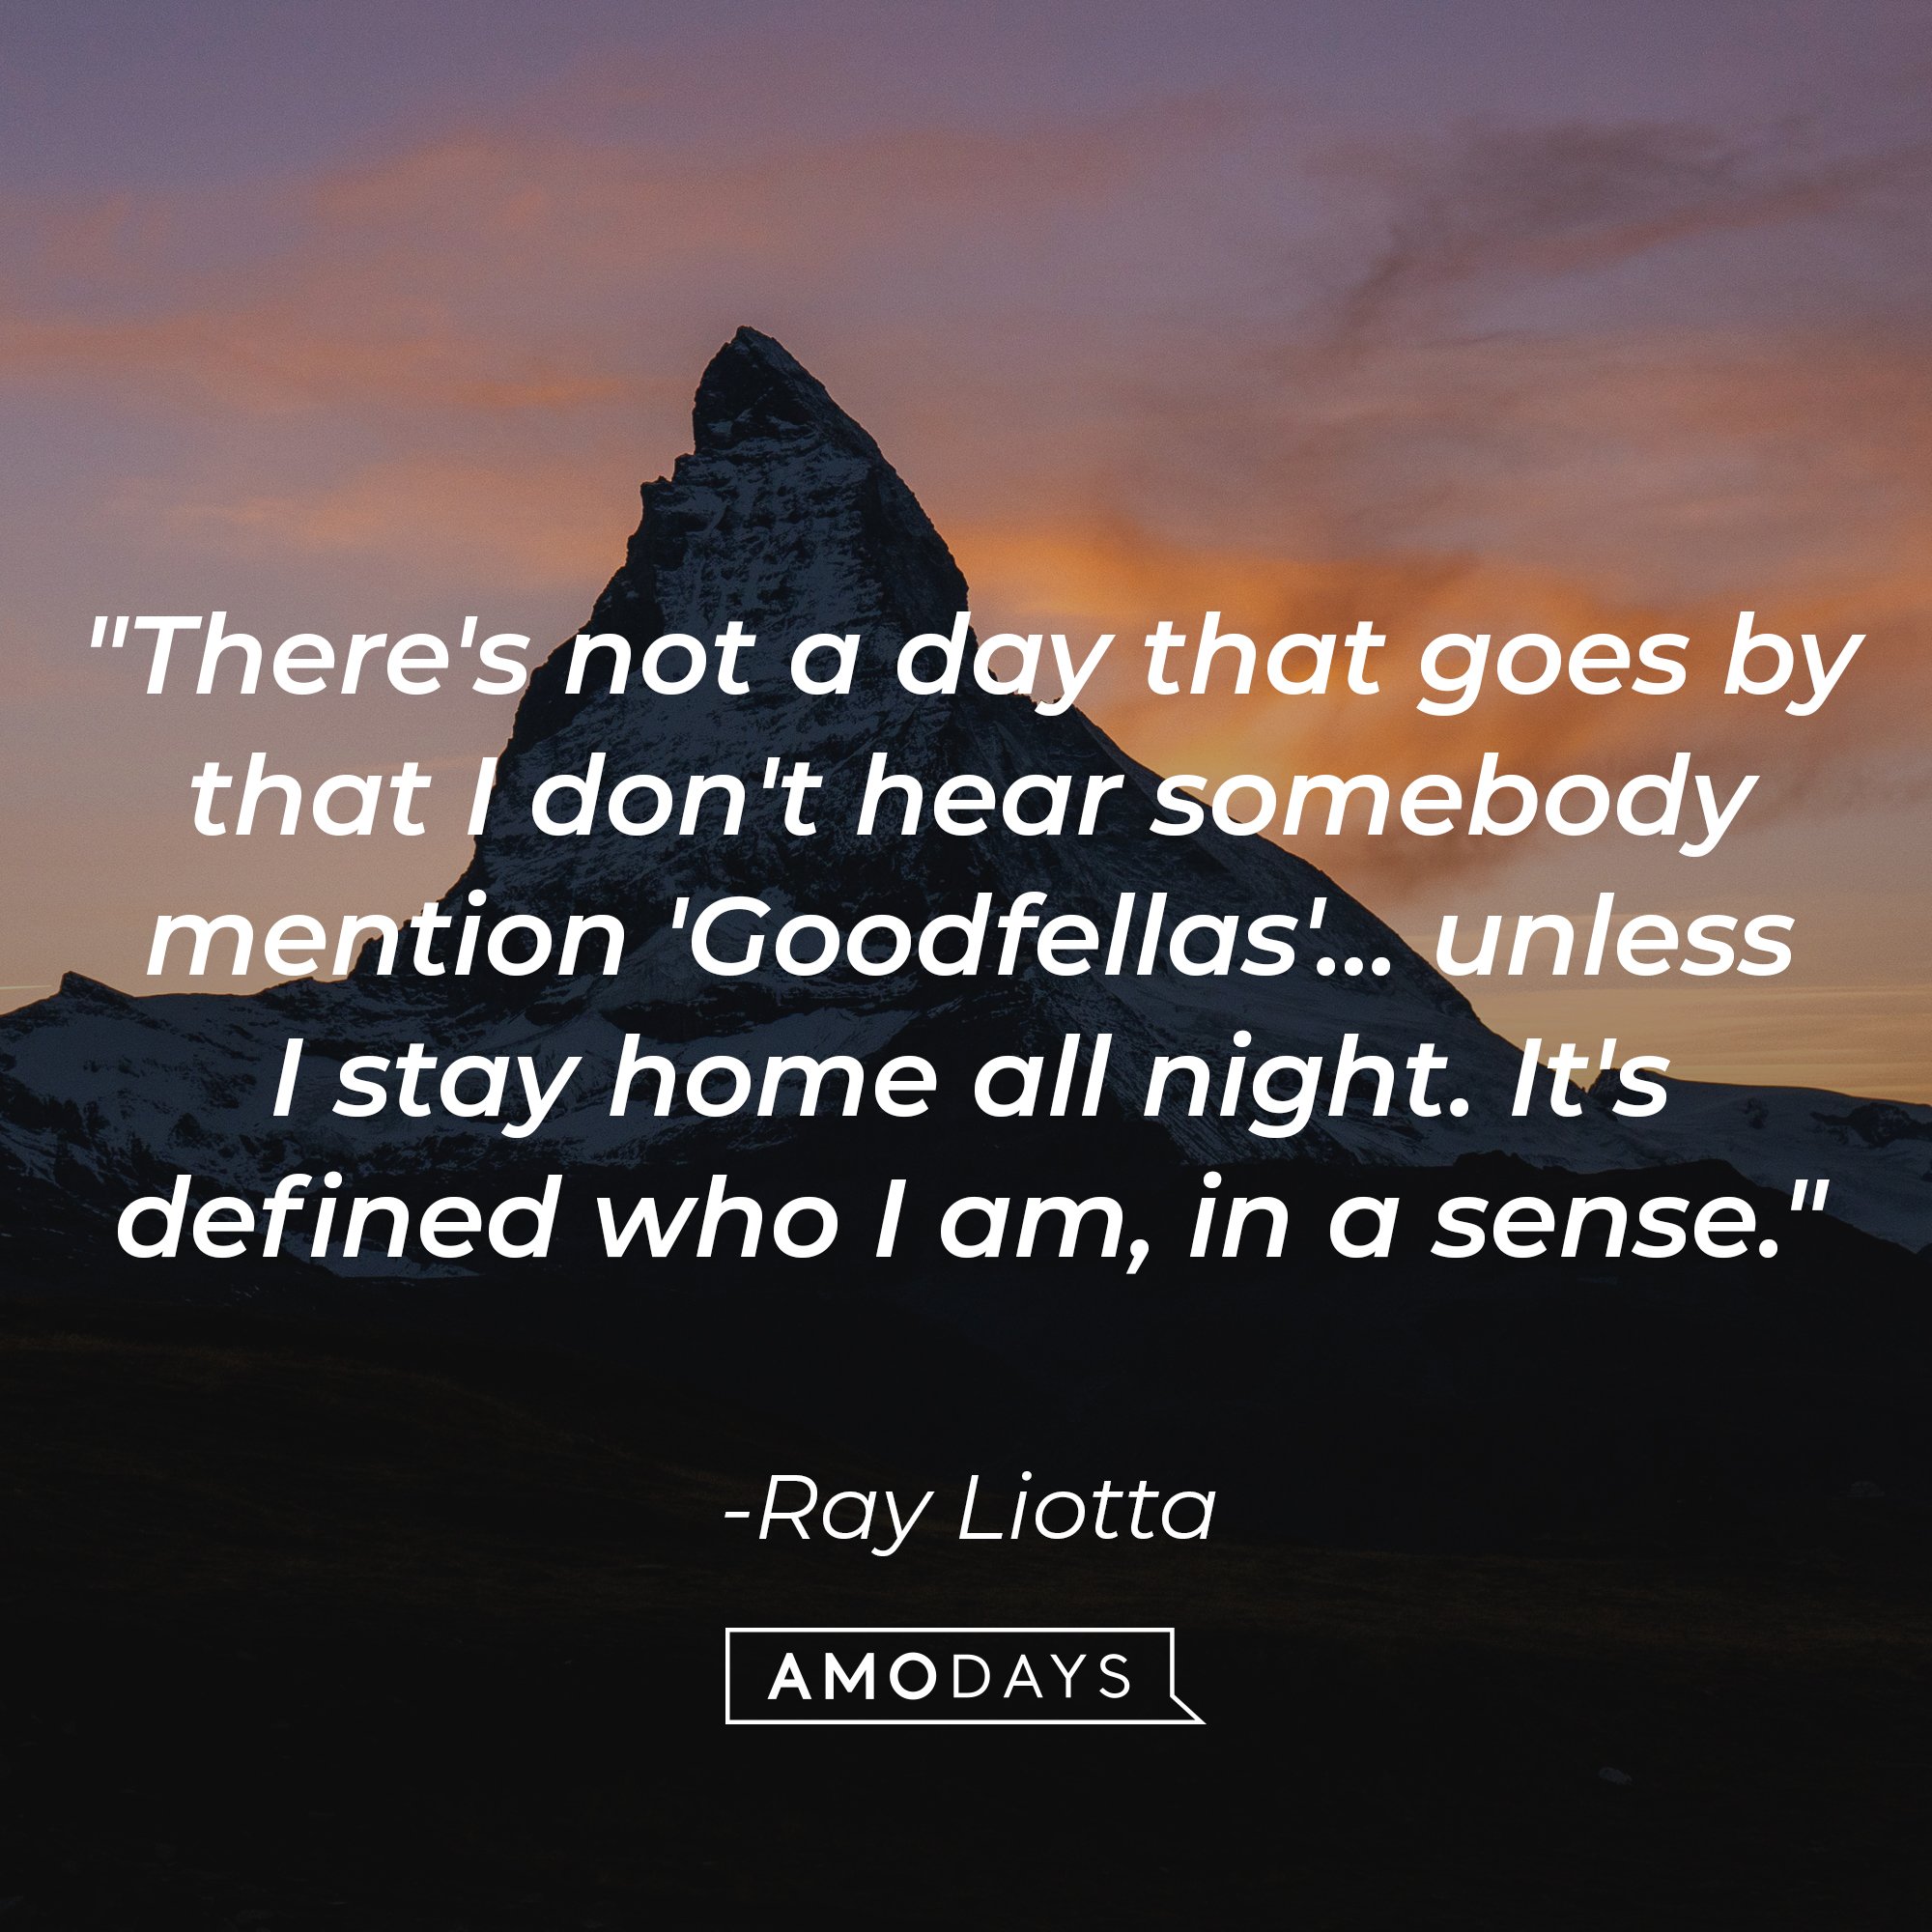 Ray Liotta’s quote: "There's not a day that goes by that I don't hear somebody mention 'Goodfellas'… unless I stay home all night. It's defined who I am, in a sense." | Image: AmoDays